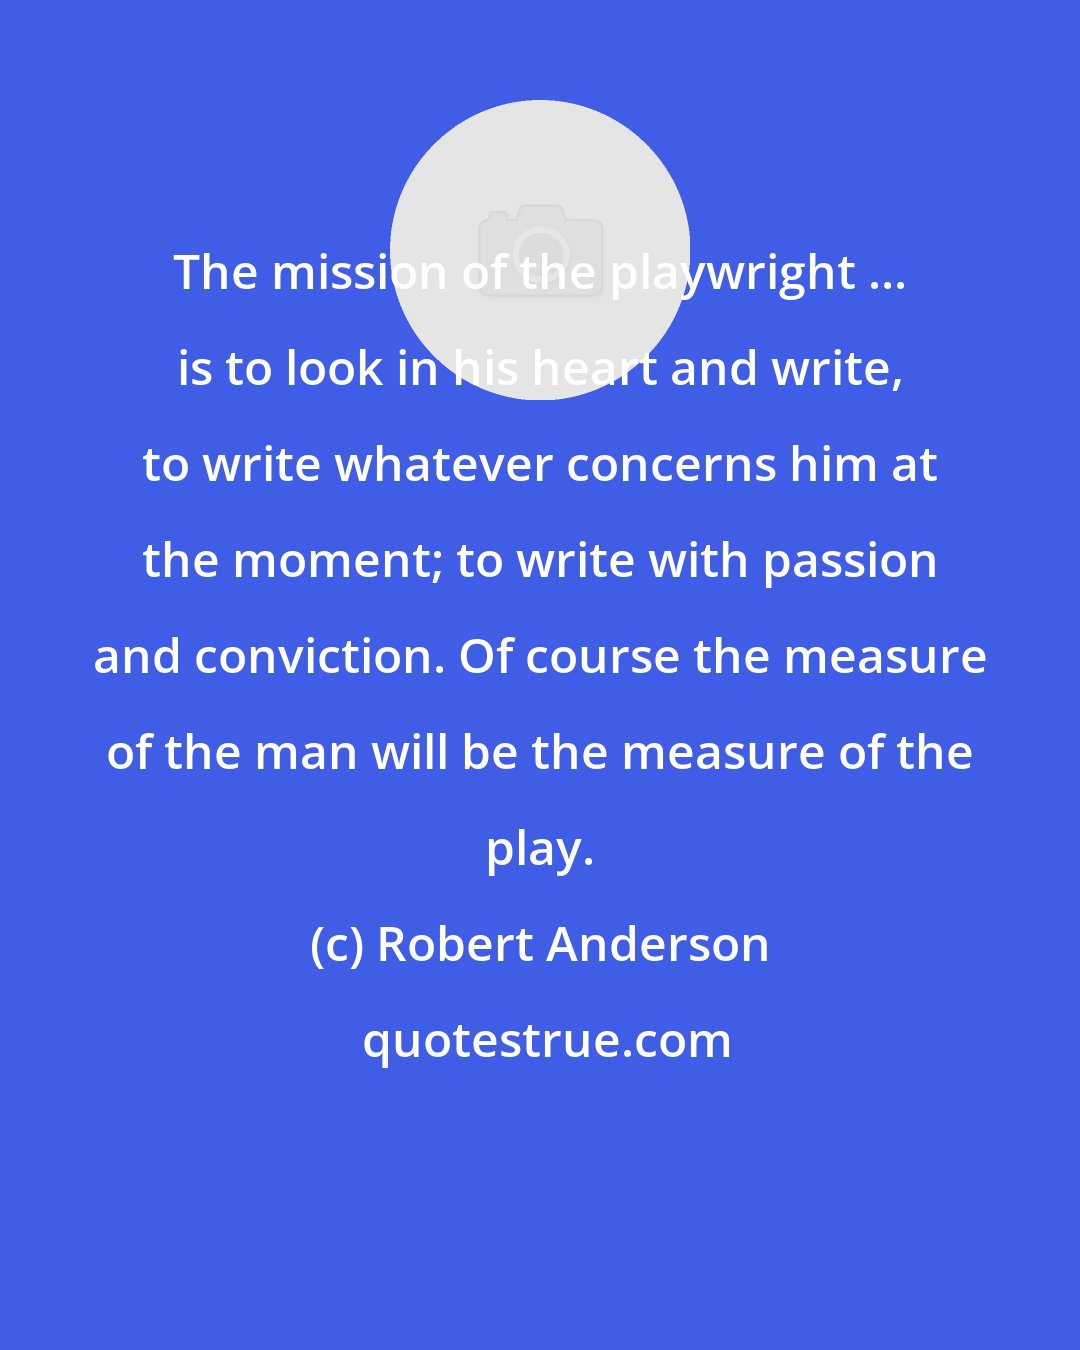 Robert Anderson: The mission of the playwright ... is to look in his heart and write, to write whatever concerns him at the moment; to write with passion and conviction. Of course the measure of the man will be the measure of the play.